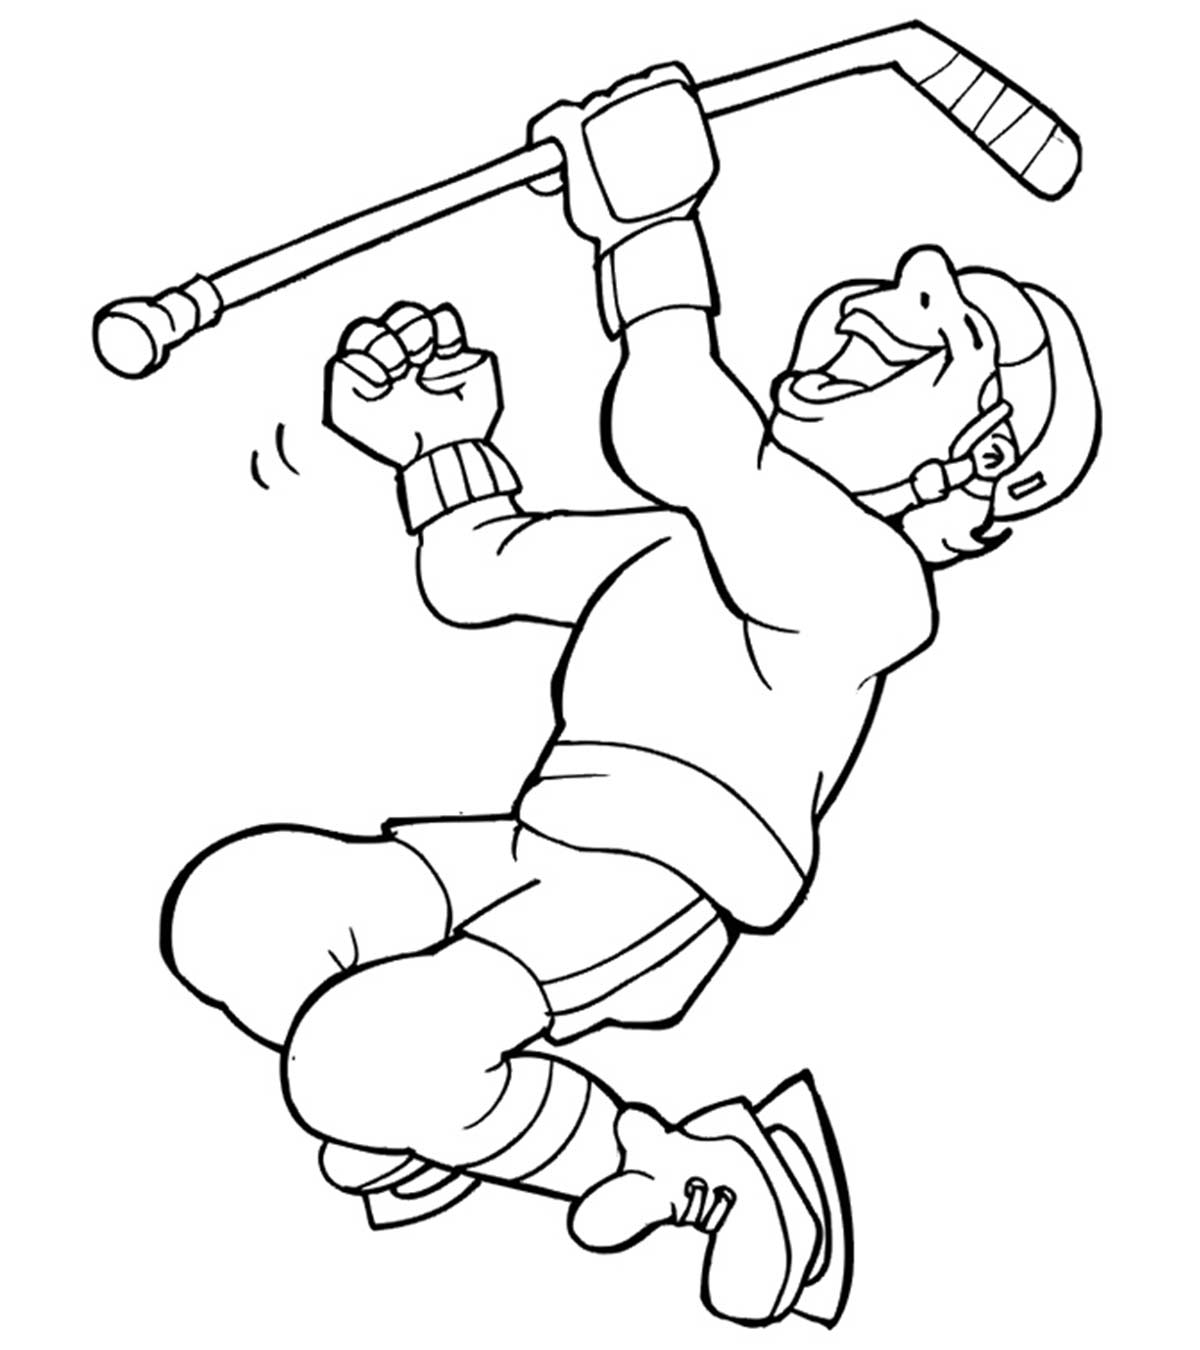 10 Best Hockey Coloring Pages Your Toddler Will Love To Color_image